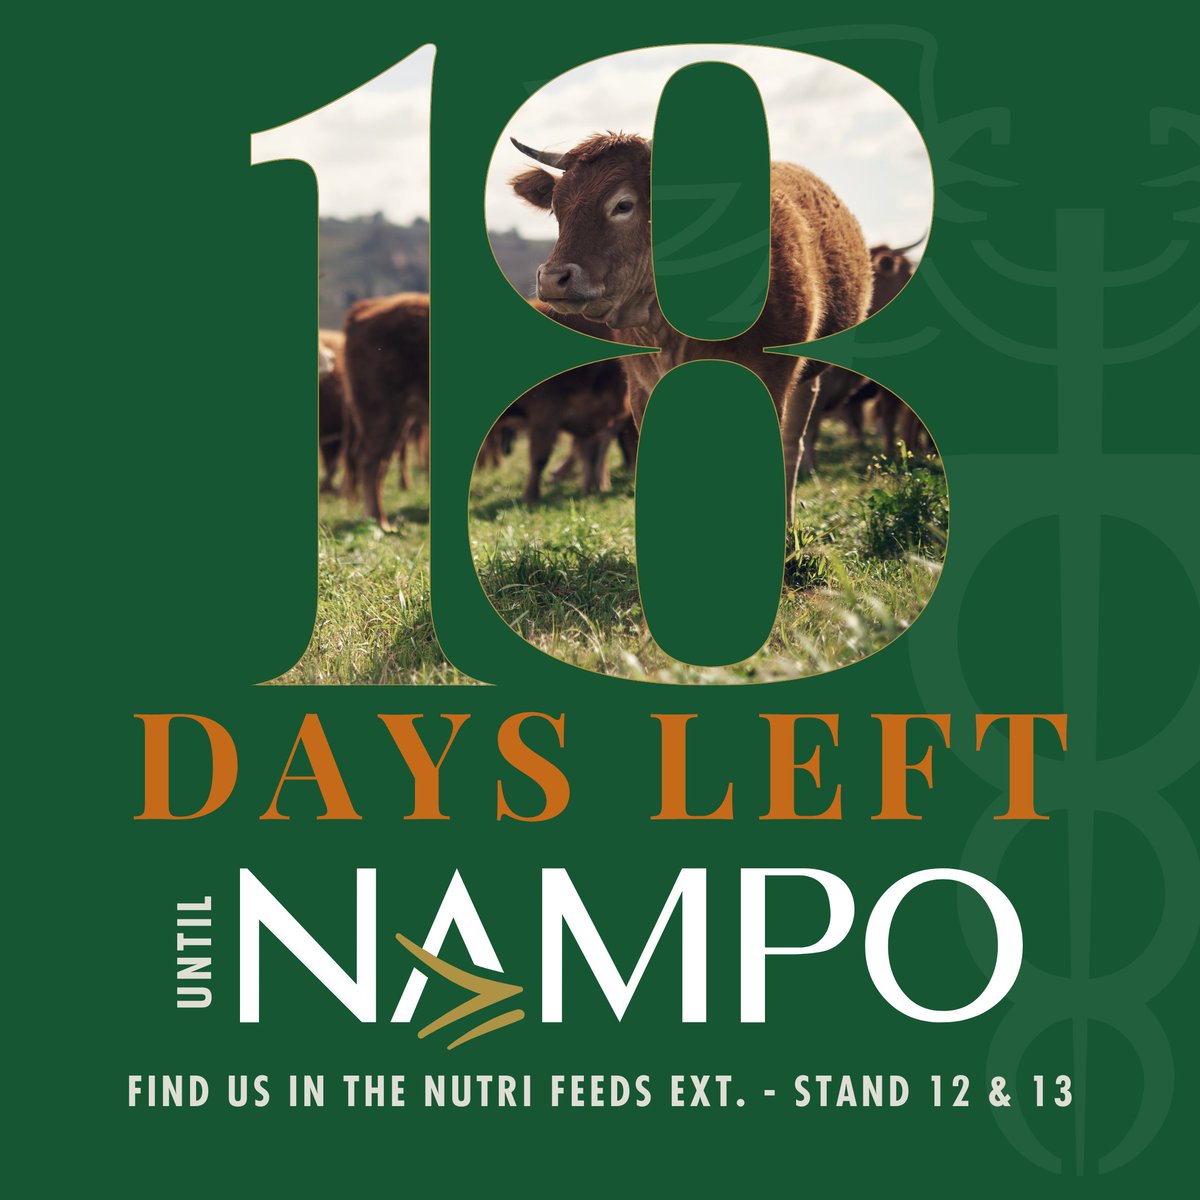 Only 18 days until @GrainSA #Nampo2024!🤩

We're gearing up for the ultimate agricultural showcase, and we want YOU to join us!

Come visit us at Stand 12 & 13 in the @NutrifeedsSA Extension and discover our innovations in livestock management, animal health, and agri-solutions.